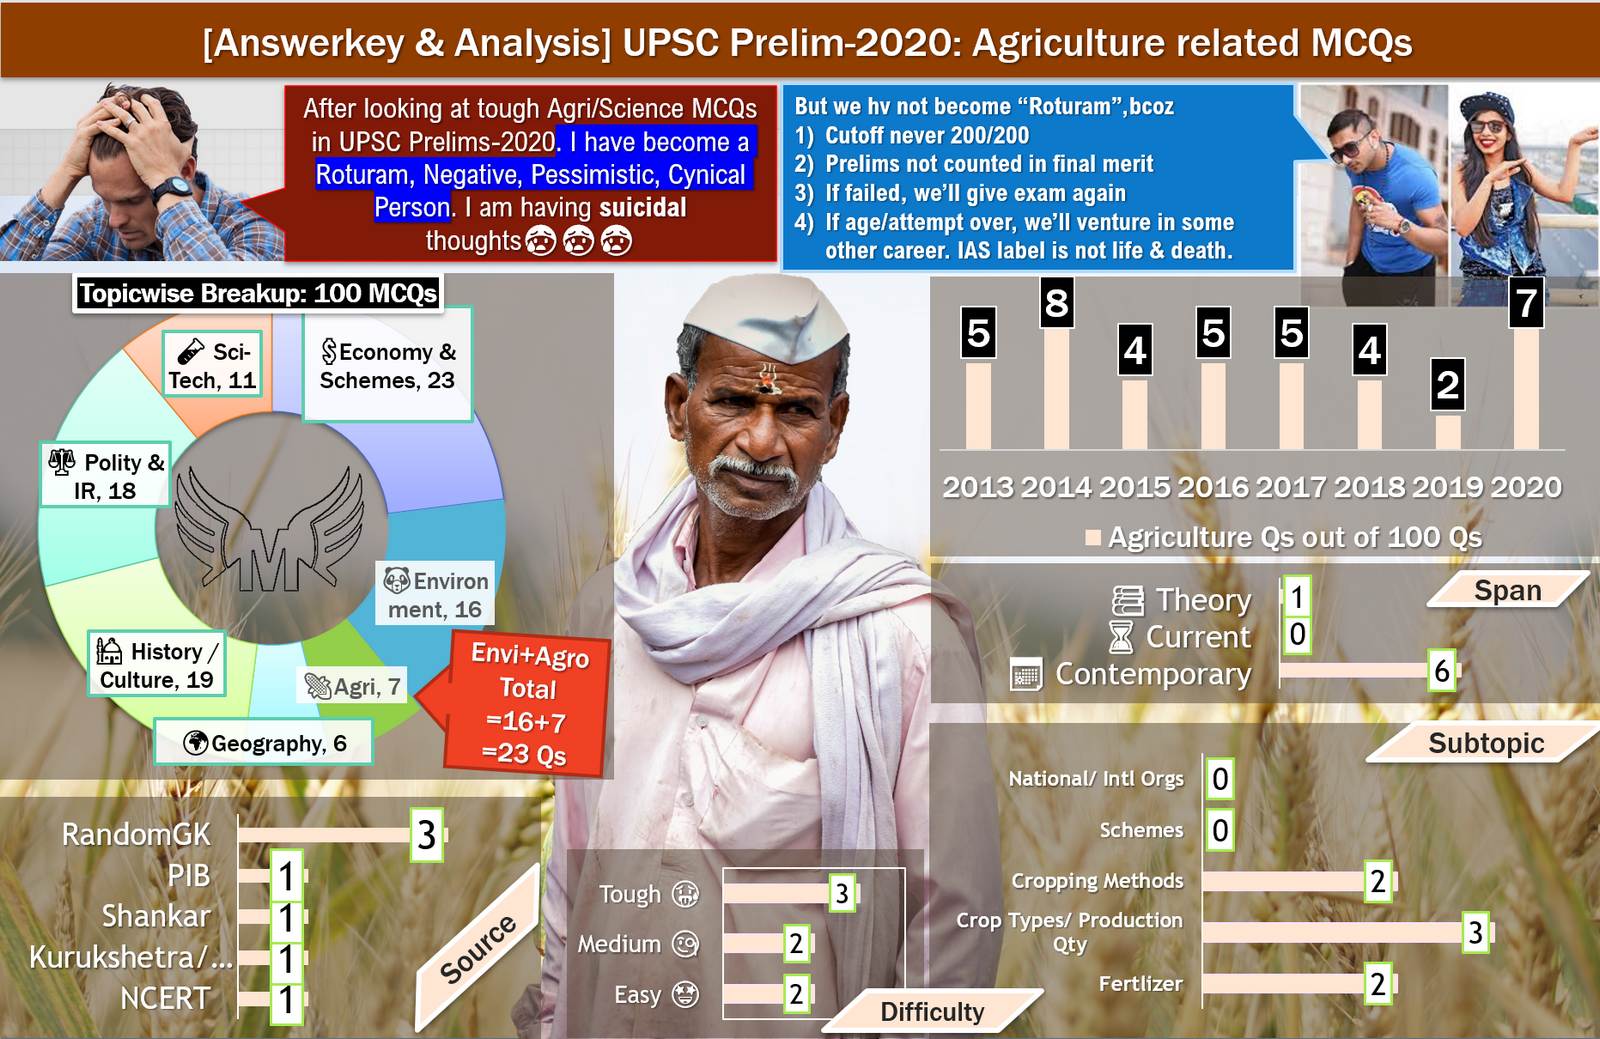 UPSC Prelims 2020 agriculture answer key and analysis by Mrunal